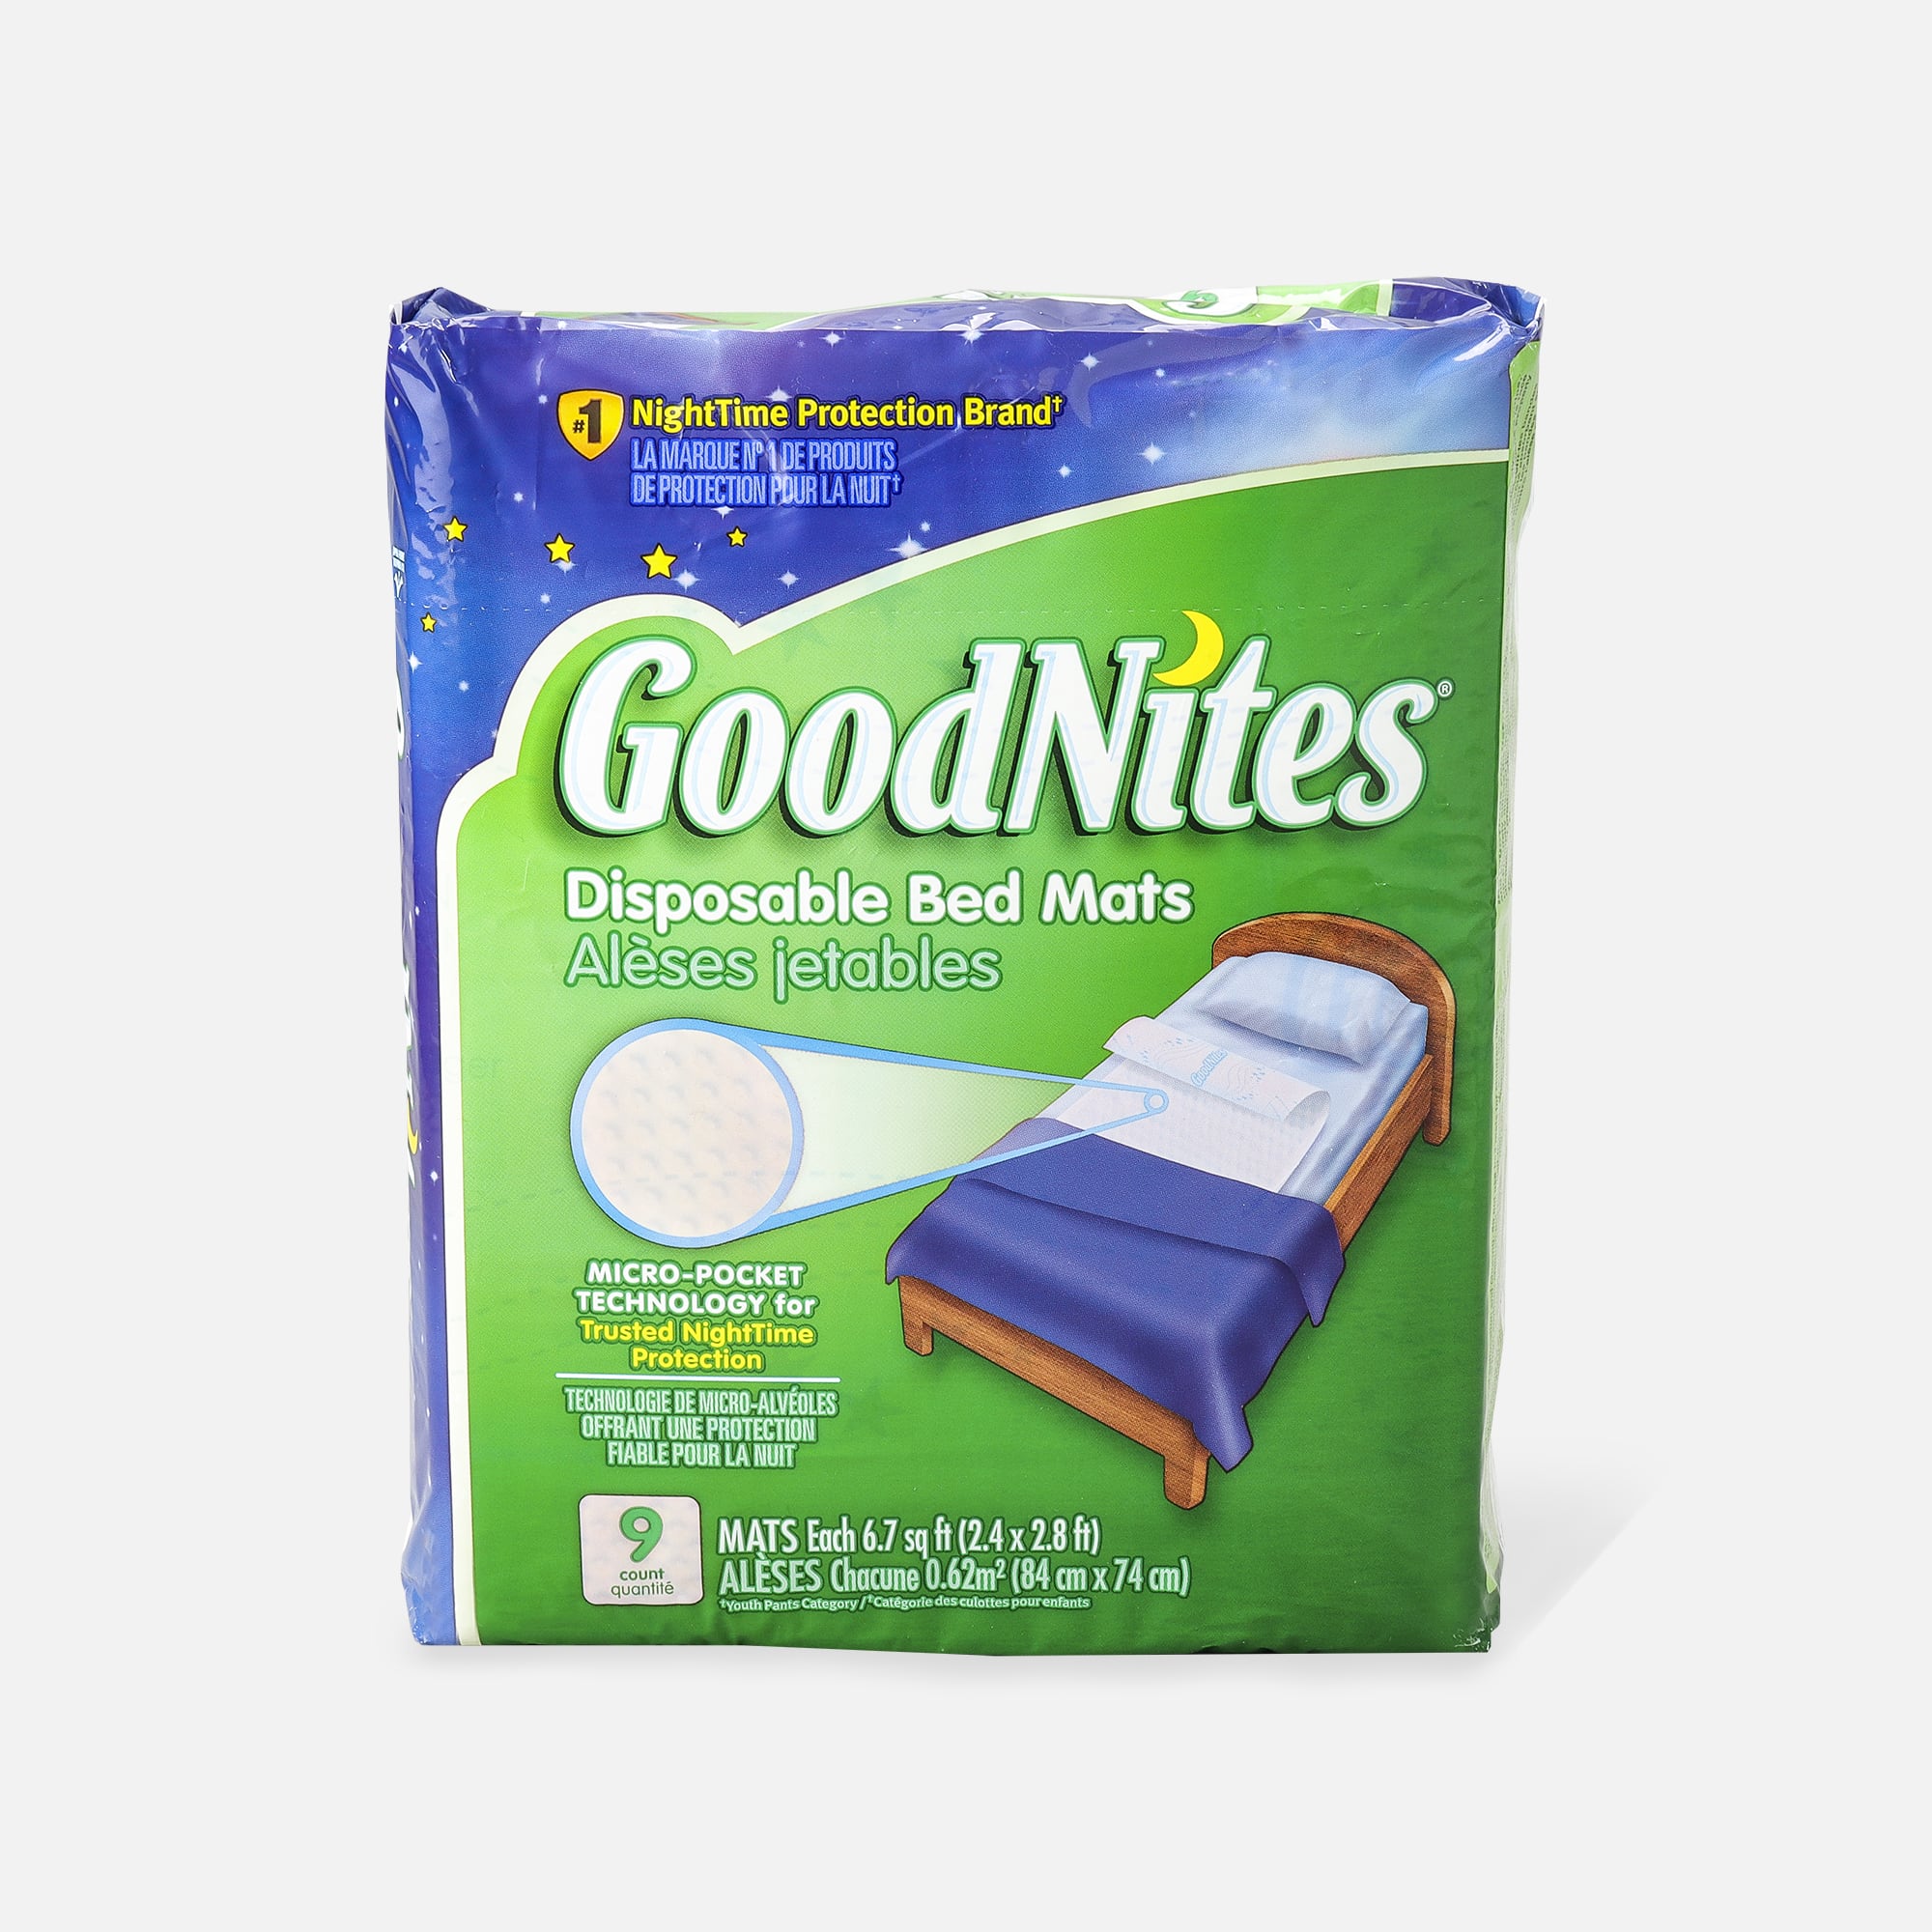 https://fsastore.com/on/demandware.static/-/Sites-hec-master/default/dwcb991e3d/images/large/goodnites-disposable-bed-pads-for-nighttime-bedwetting-non-slip-waterproof-mattress-pad-30-x-36-9-count-27964-01.jpg